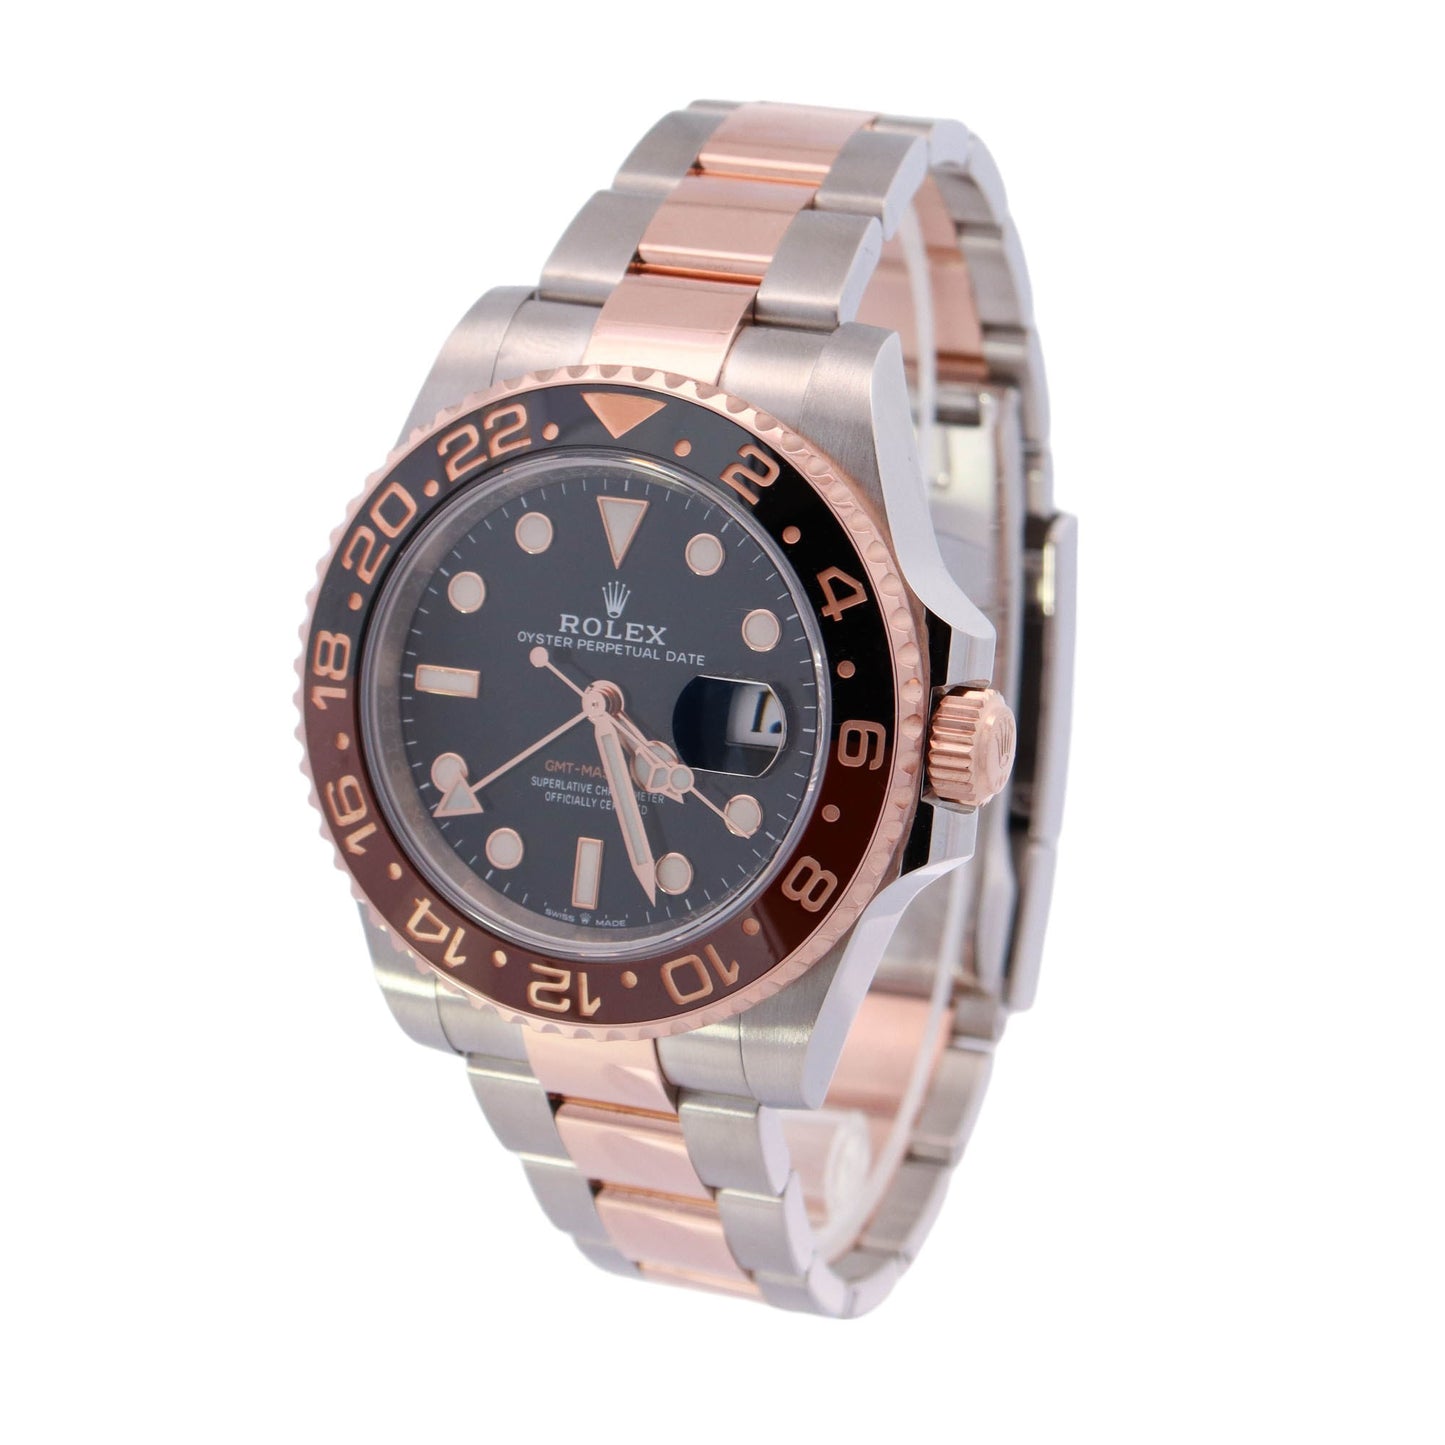 Rolex GMT Master II "Rootbeer" Two Tone Yellow Gold & Steel 40mm Black Dot Dial Watch Reference #: 126711CHNR - Happy Jewelers Fine Jewelry Lifetime Warranty